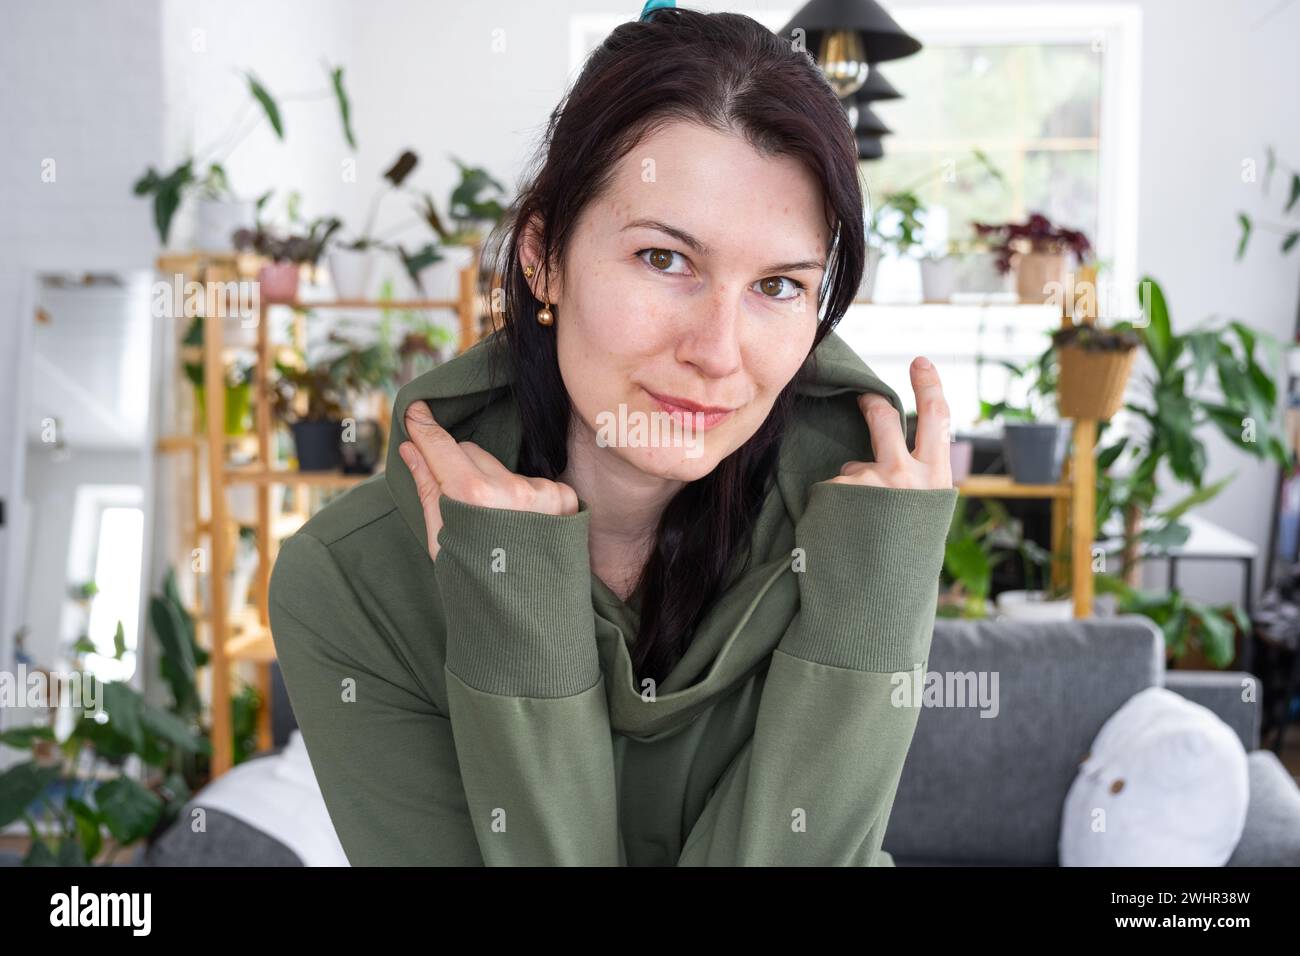 Large portrait Joyful emotions of a woman in the hood in her home in a bright modern interior with home plants. Eco-friendly por Stock Photo